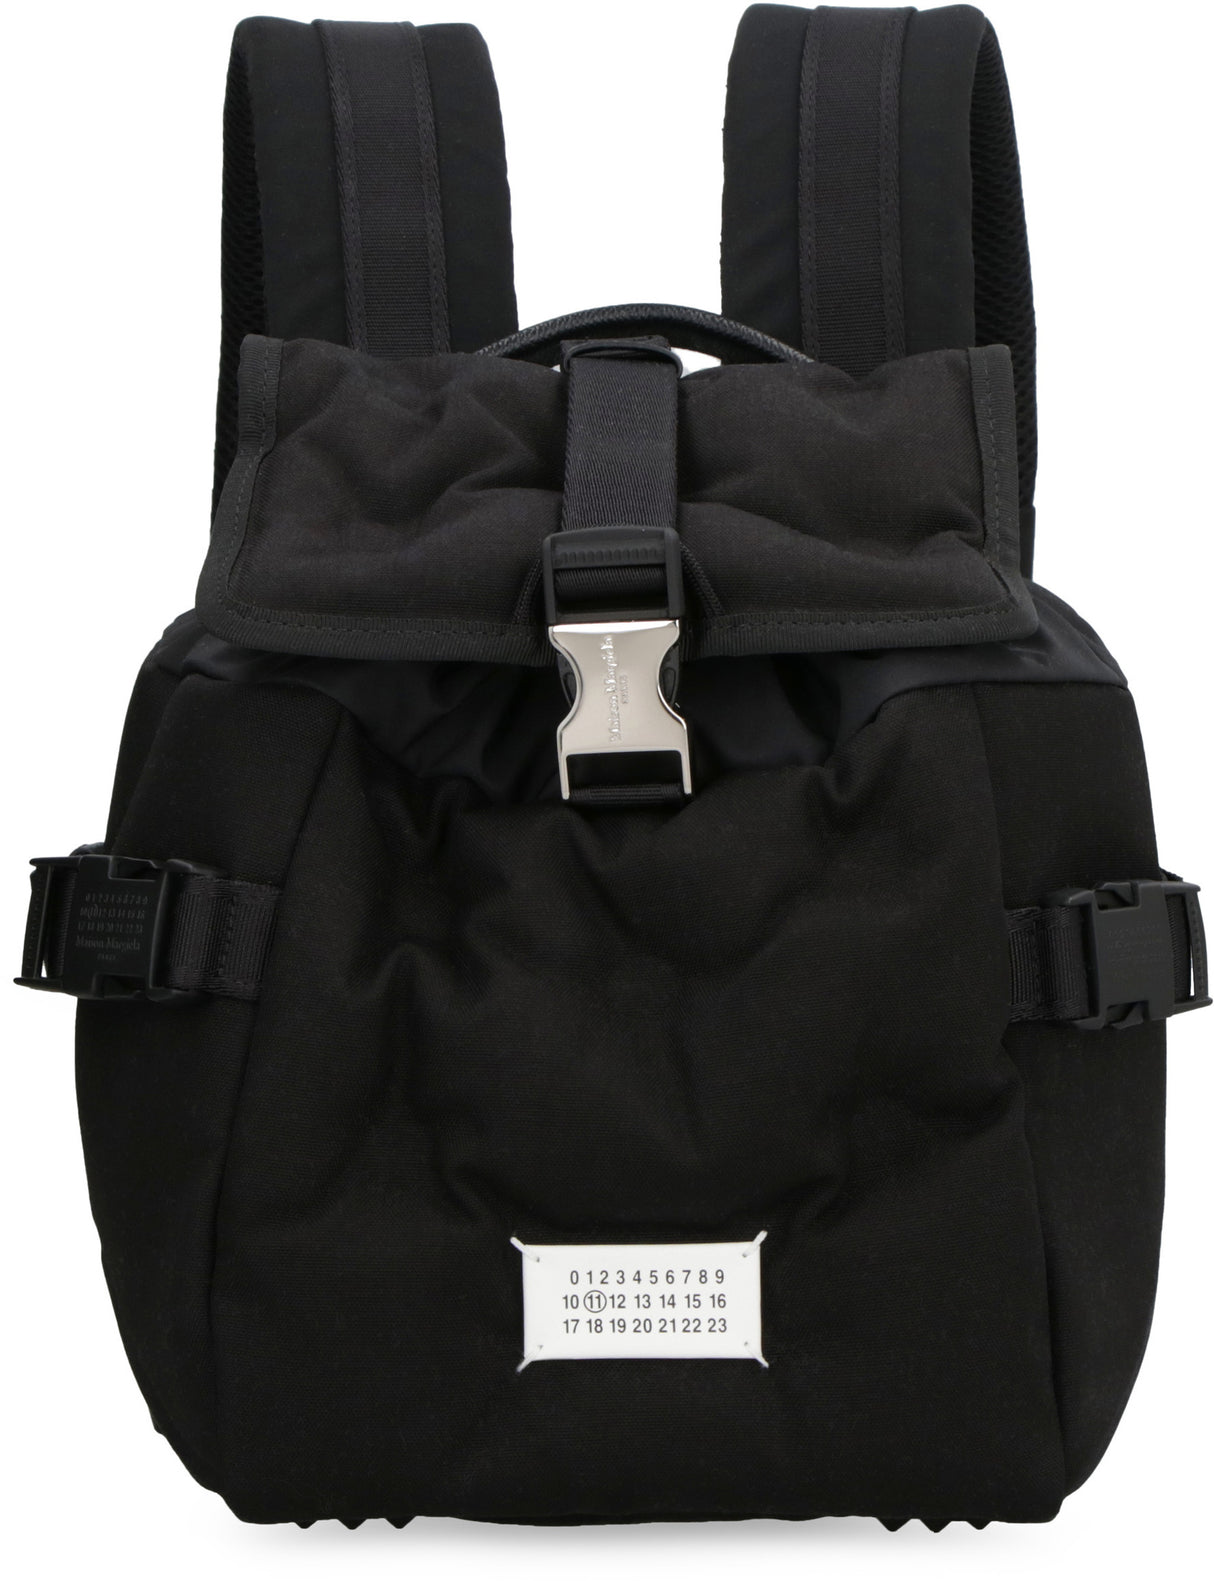 MAISON MARGIELA Luxury Men's Canvas Backpack with Leather Details and Silver-Tone Hardware